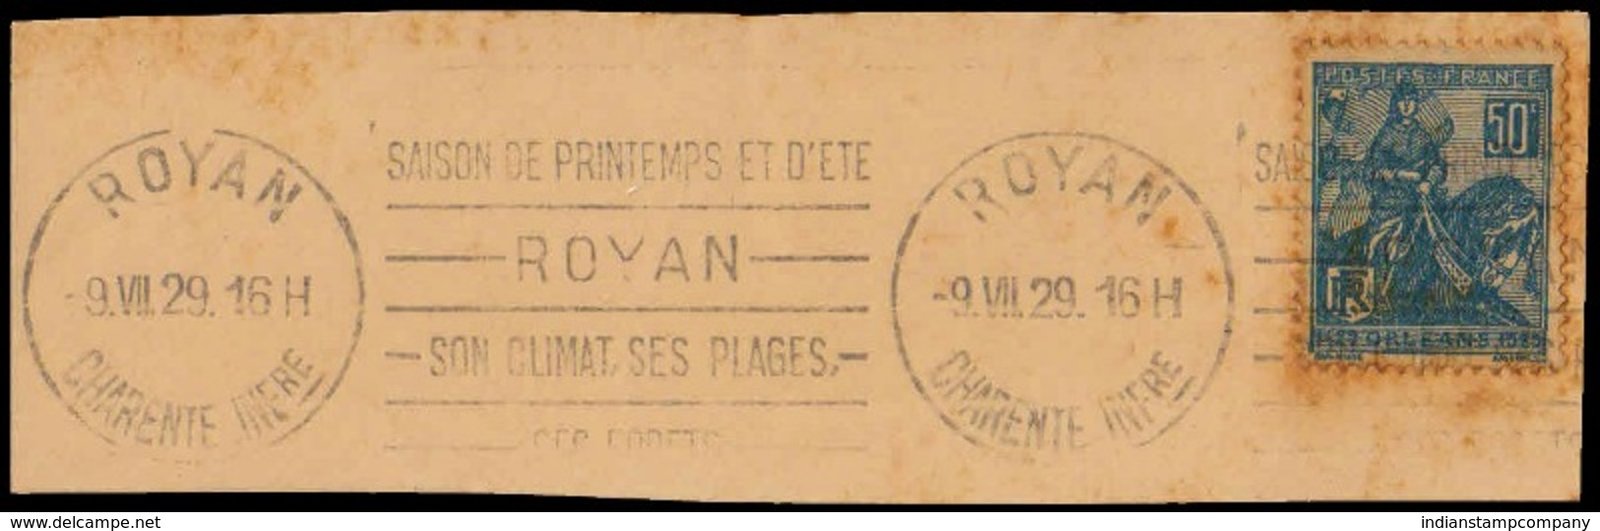 FRANCE 1929-Slogan Cancellation-Joan of Arc Stamp-As Per Scan, Rare